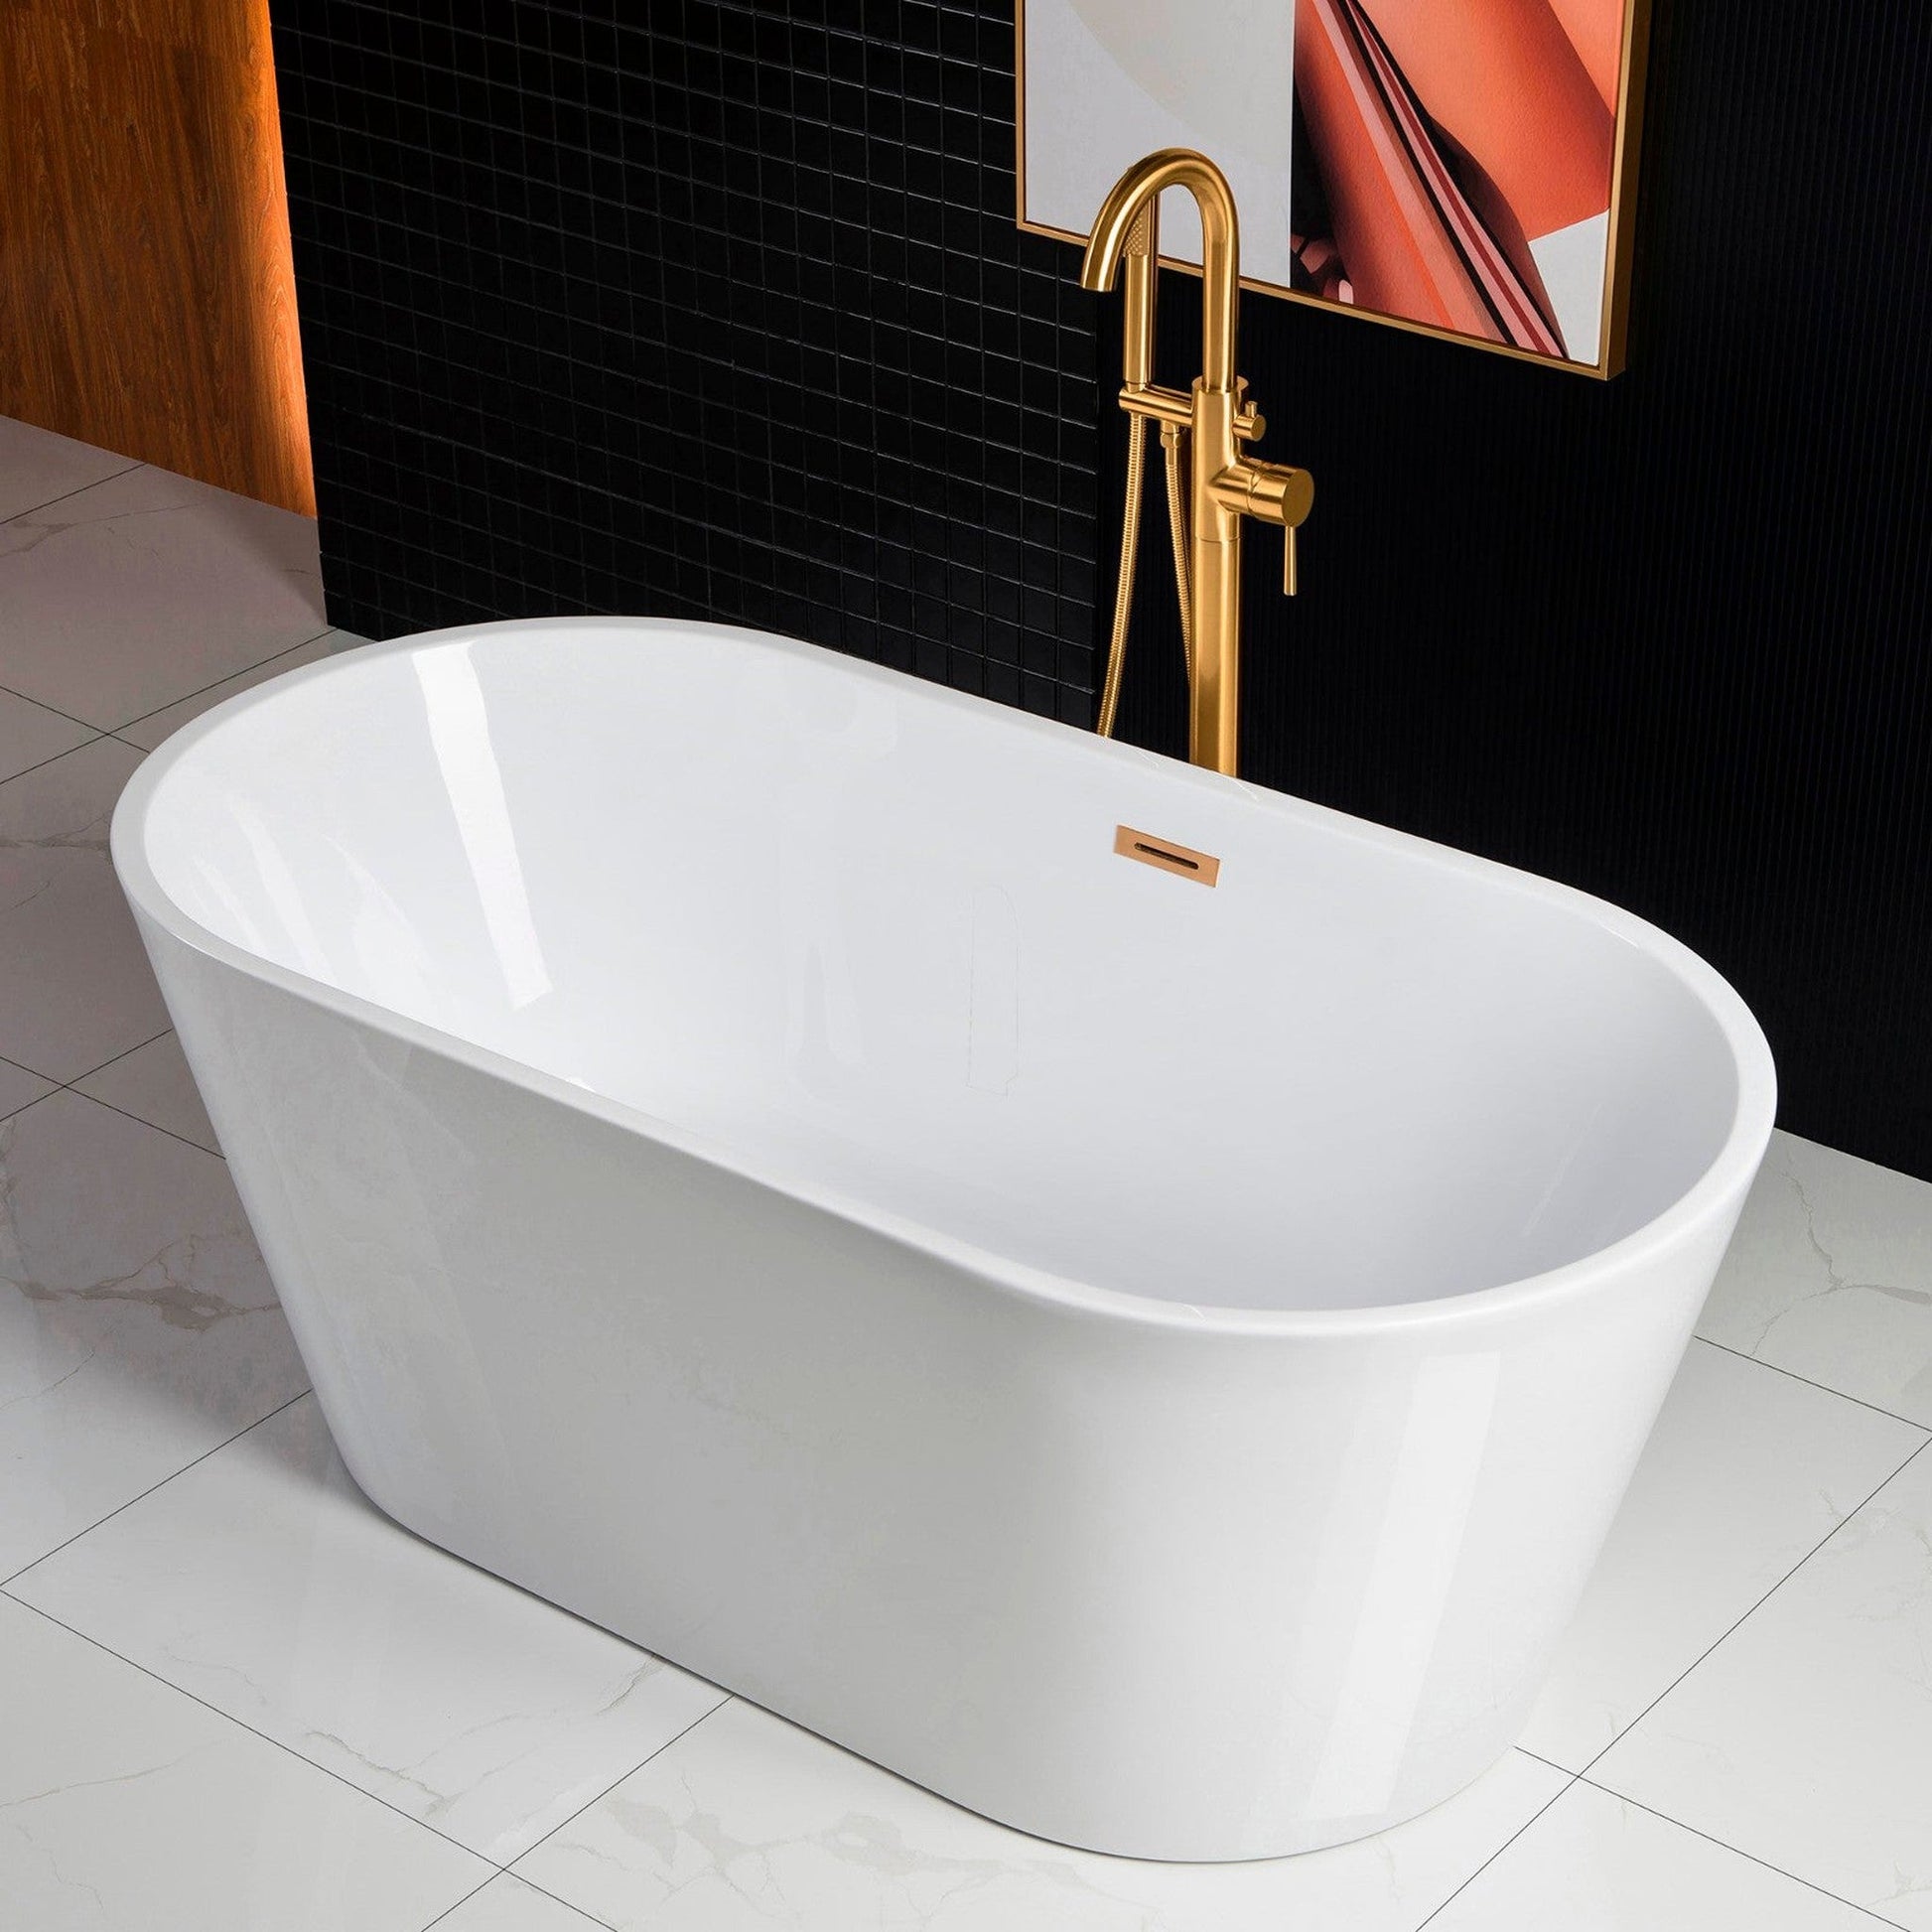 WoodBridge B0014 59" White Acrylic Freestanding Soaking Bathtub With Brushed Gold Drain, Overflow, F-0007BGRD Tub Filler and Caddy Tray